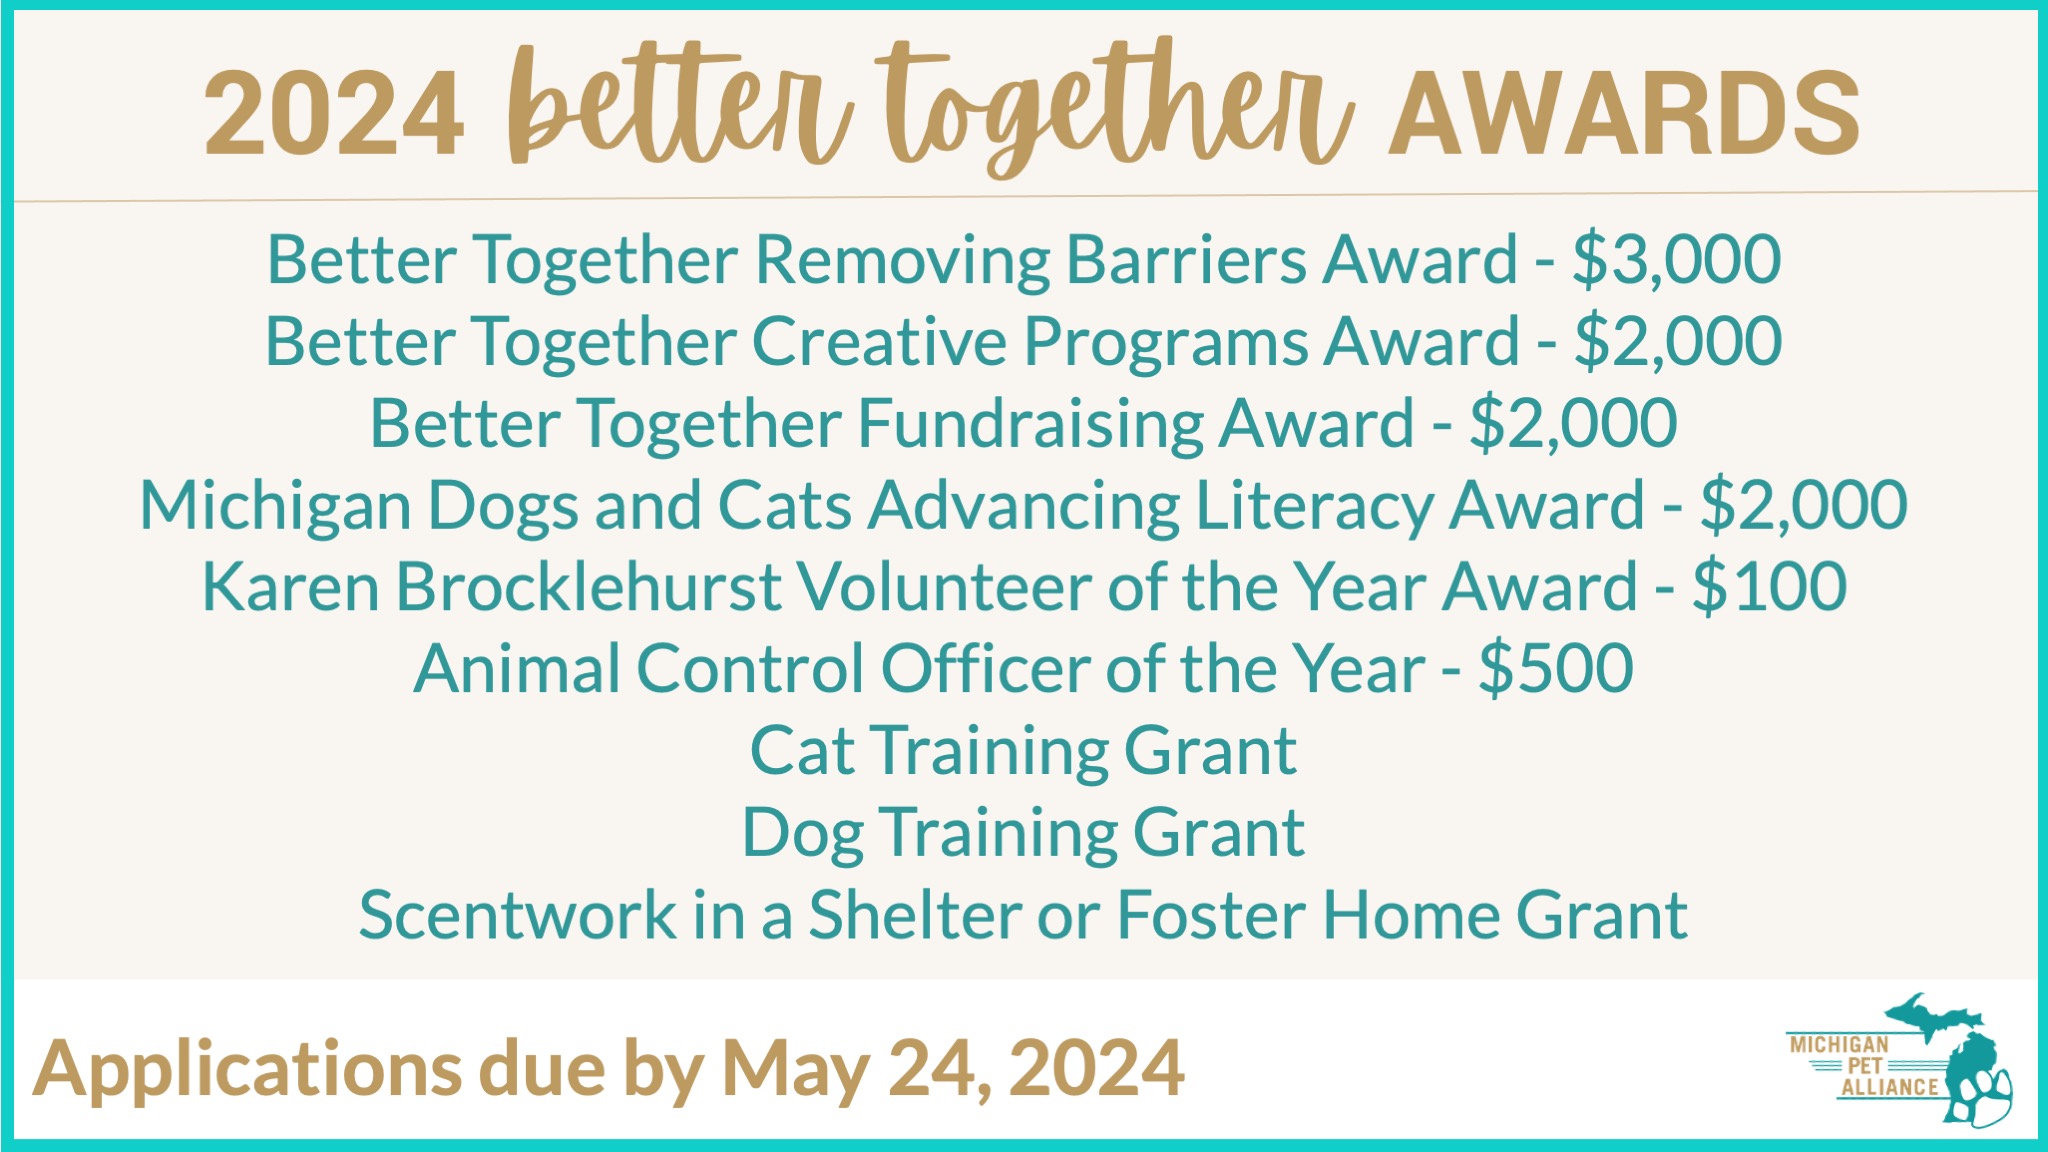 2024 Better Together Awards Applications due by May 24, 2024